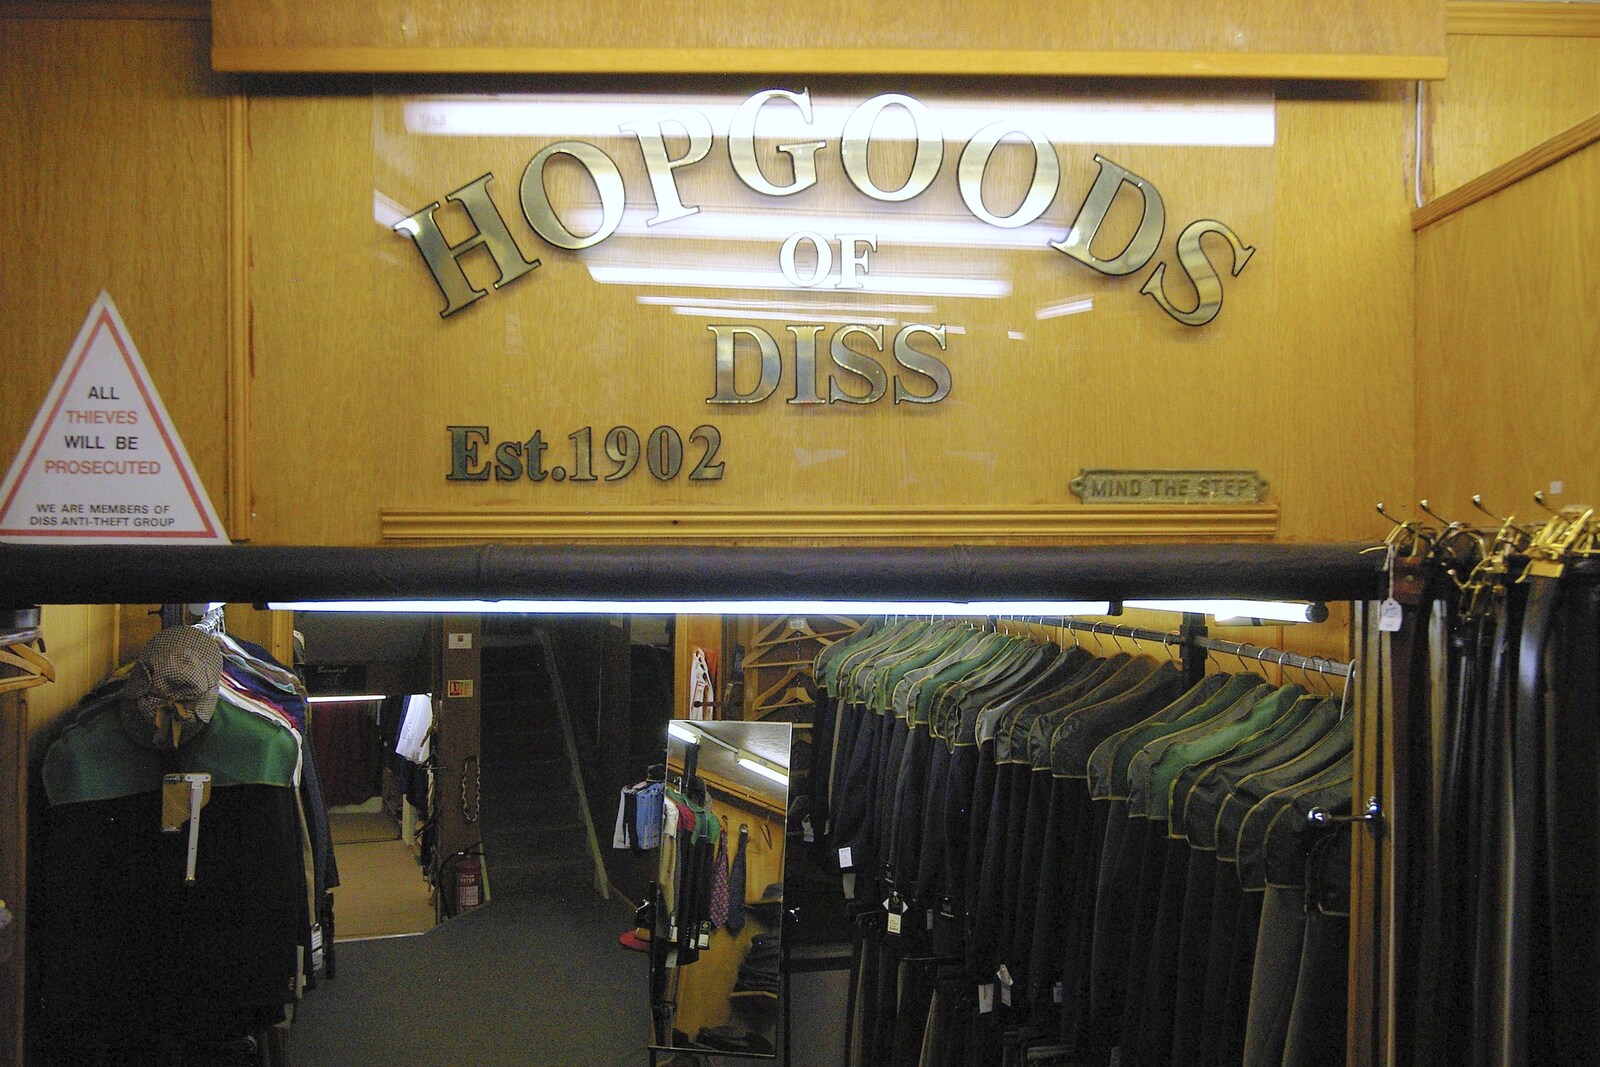 A Hopgoods sign from A Portrait of Hopgoods: Gentlemen's Outfitters, Diss, Norfolk - 4th January 2006